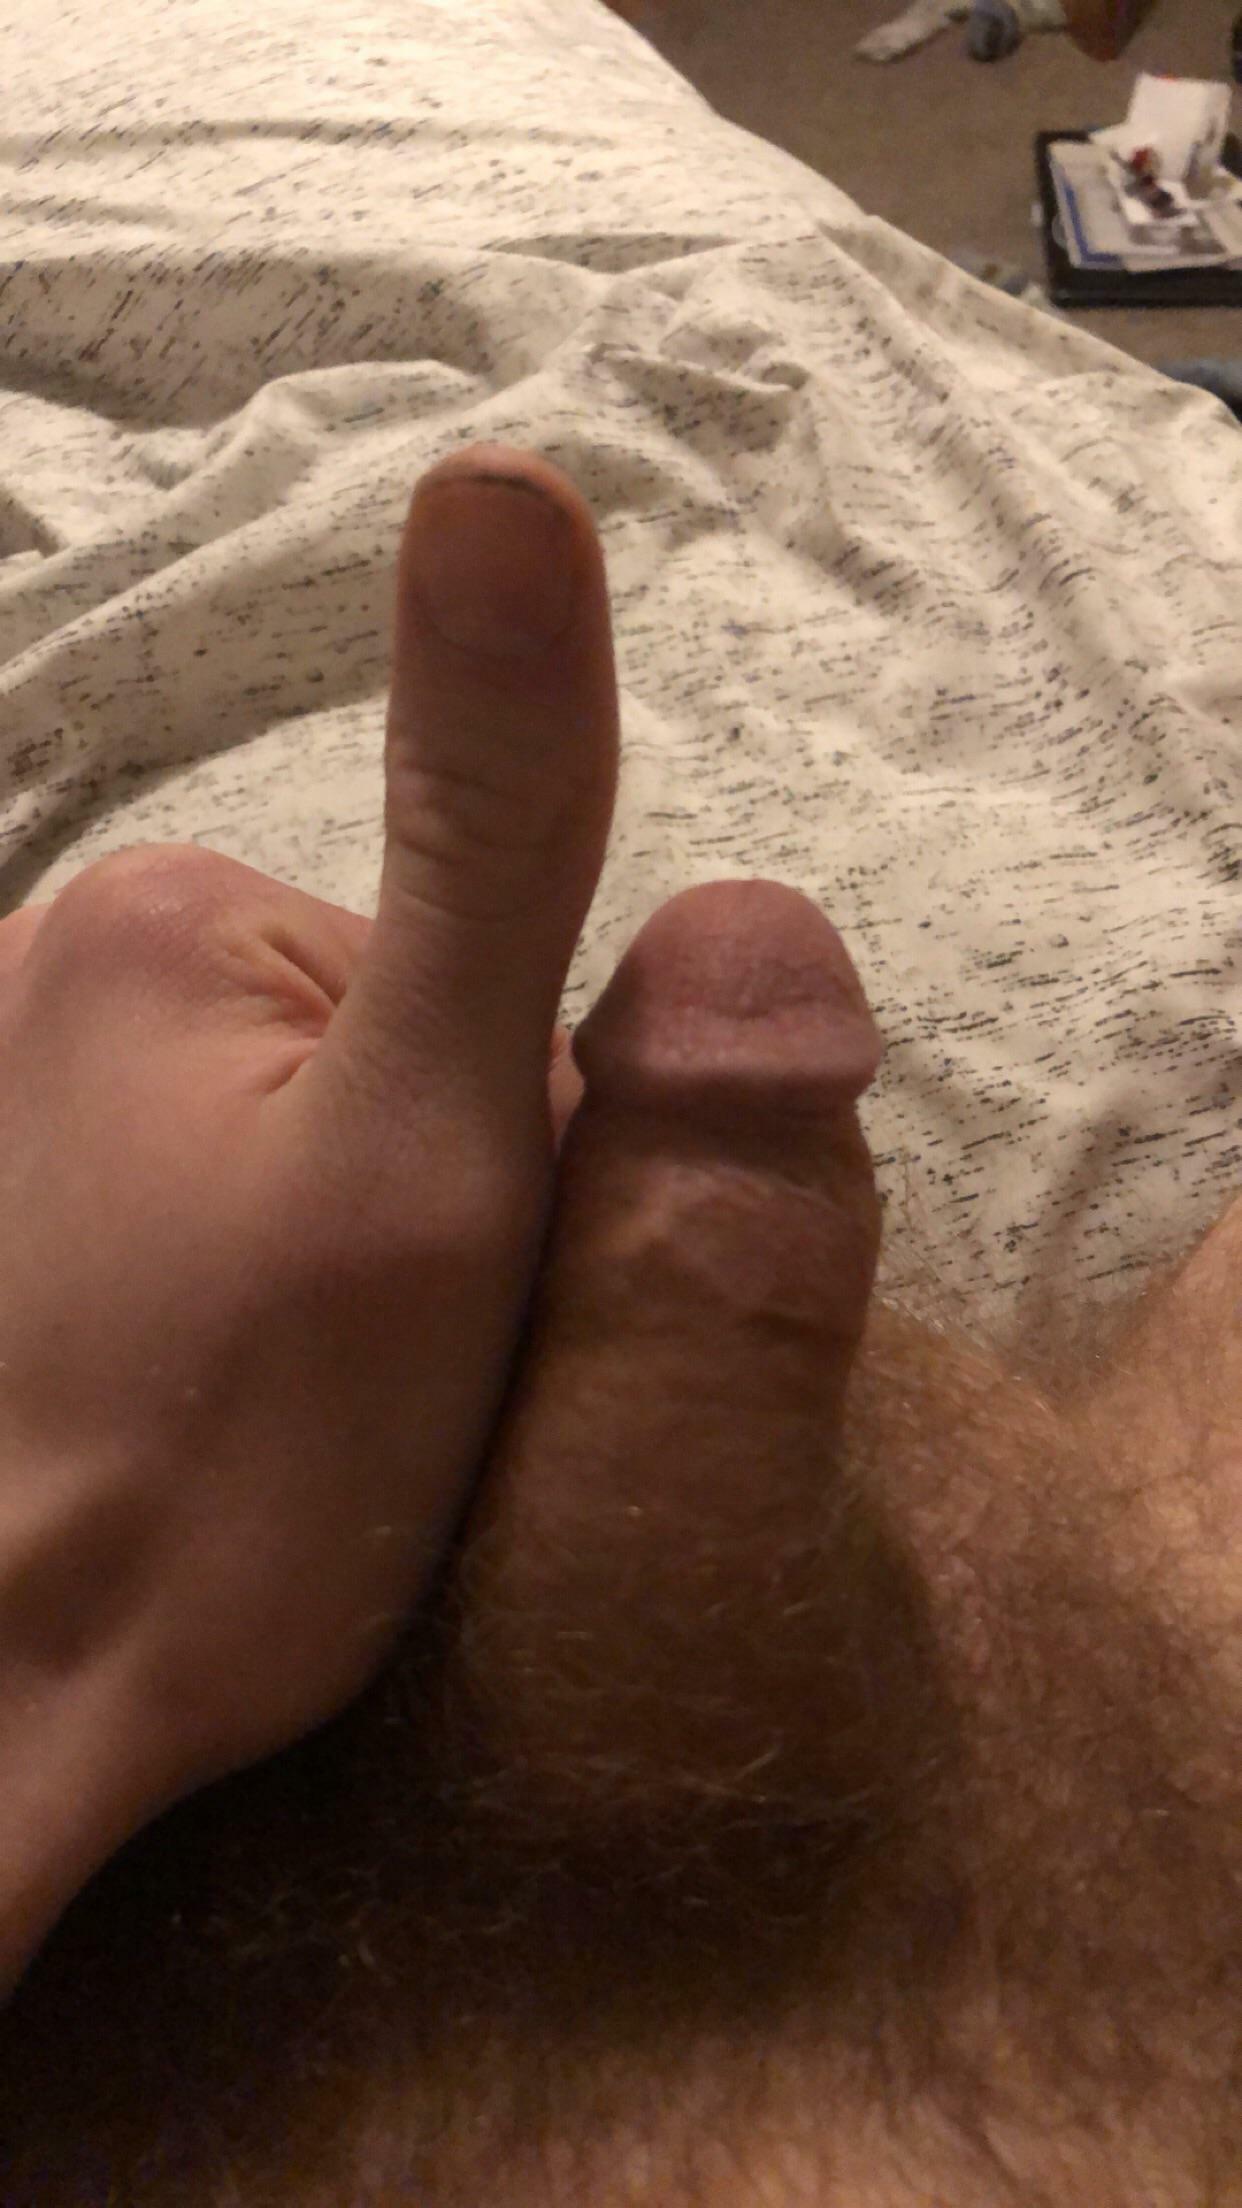 Got cucked by my girlfriend for the first time today, every up vote is a blowjob